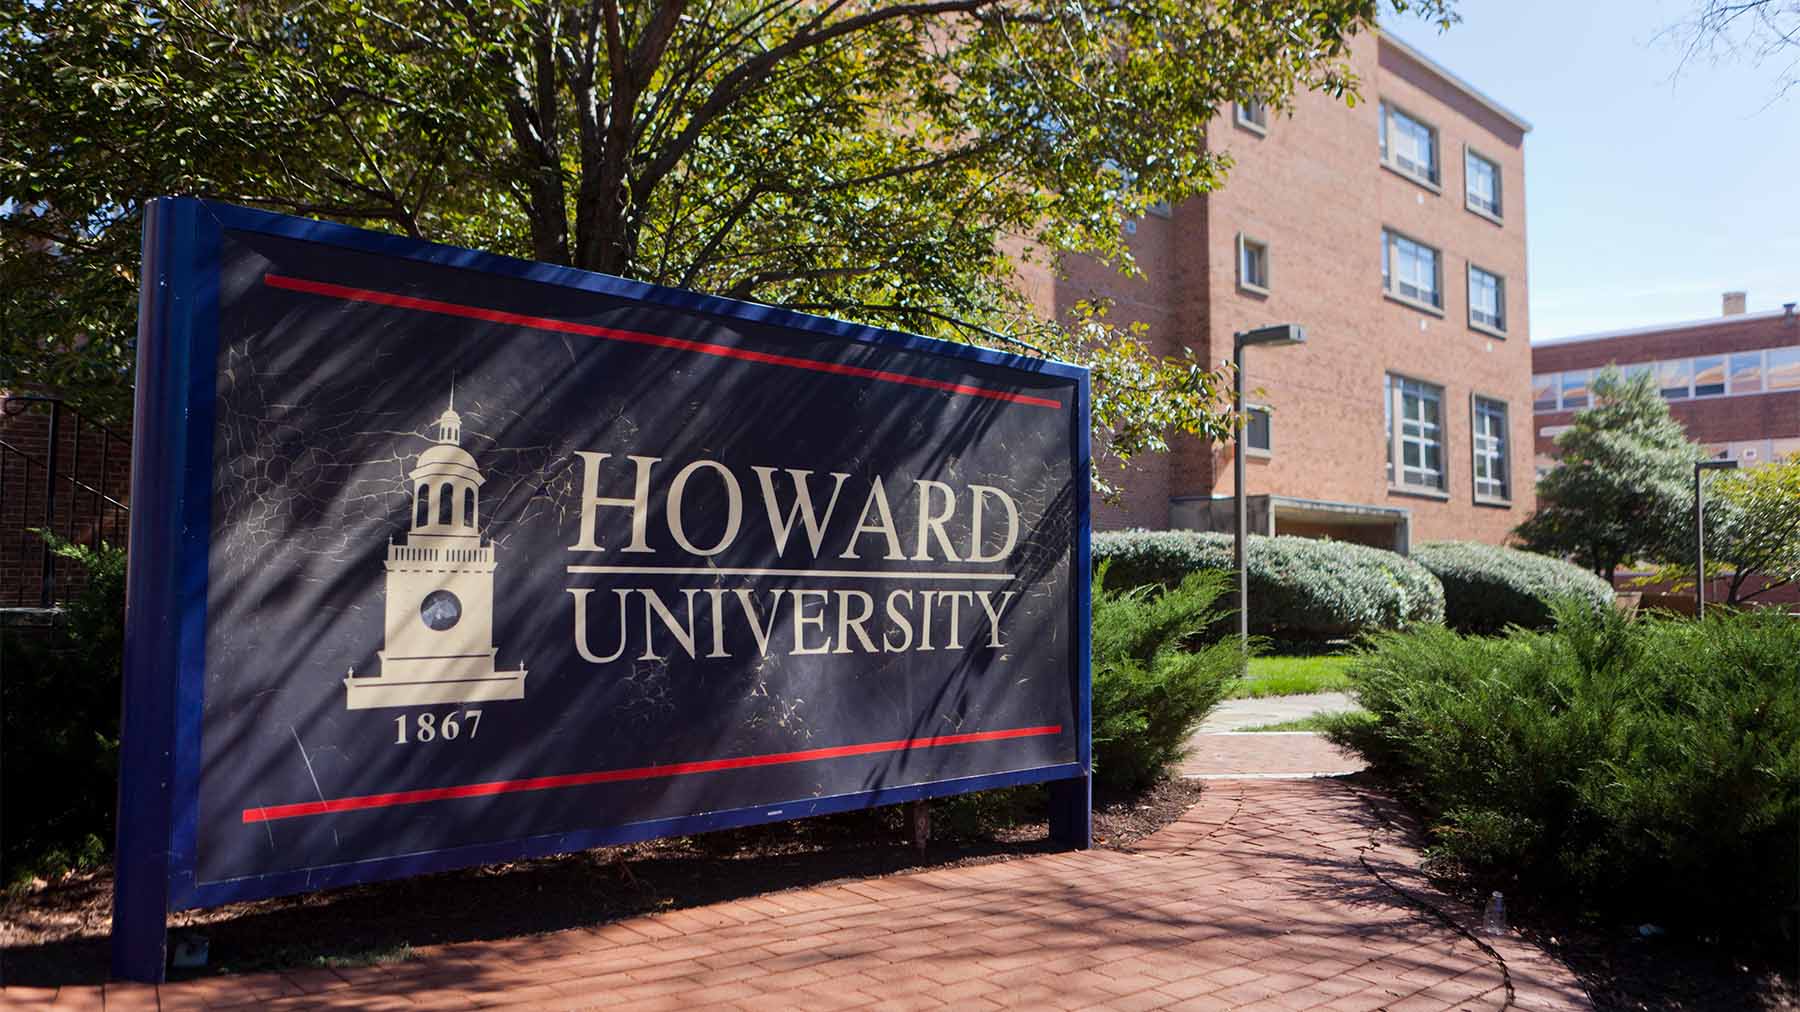 SPLC condemns bomb threats to HBCUs | Southern Poverty Law Center